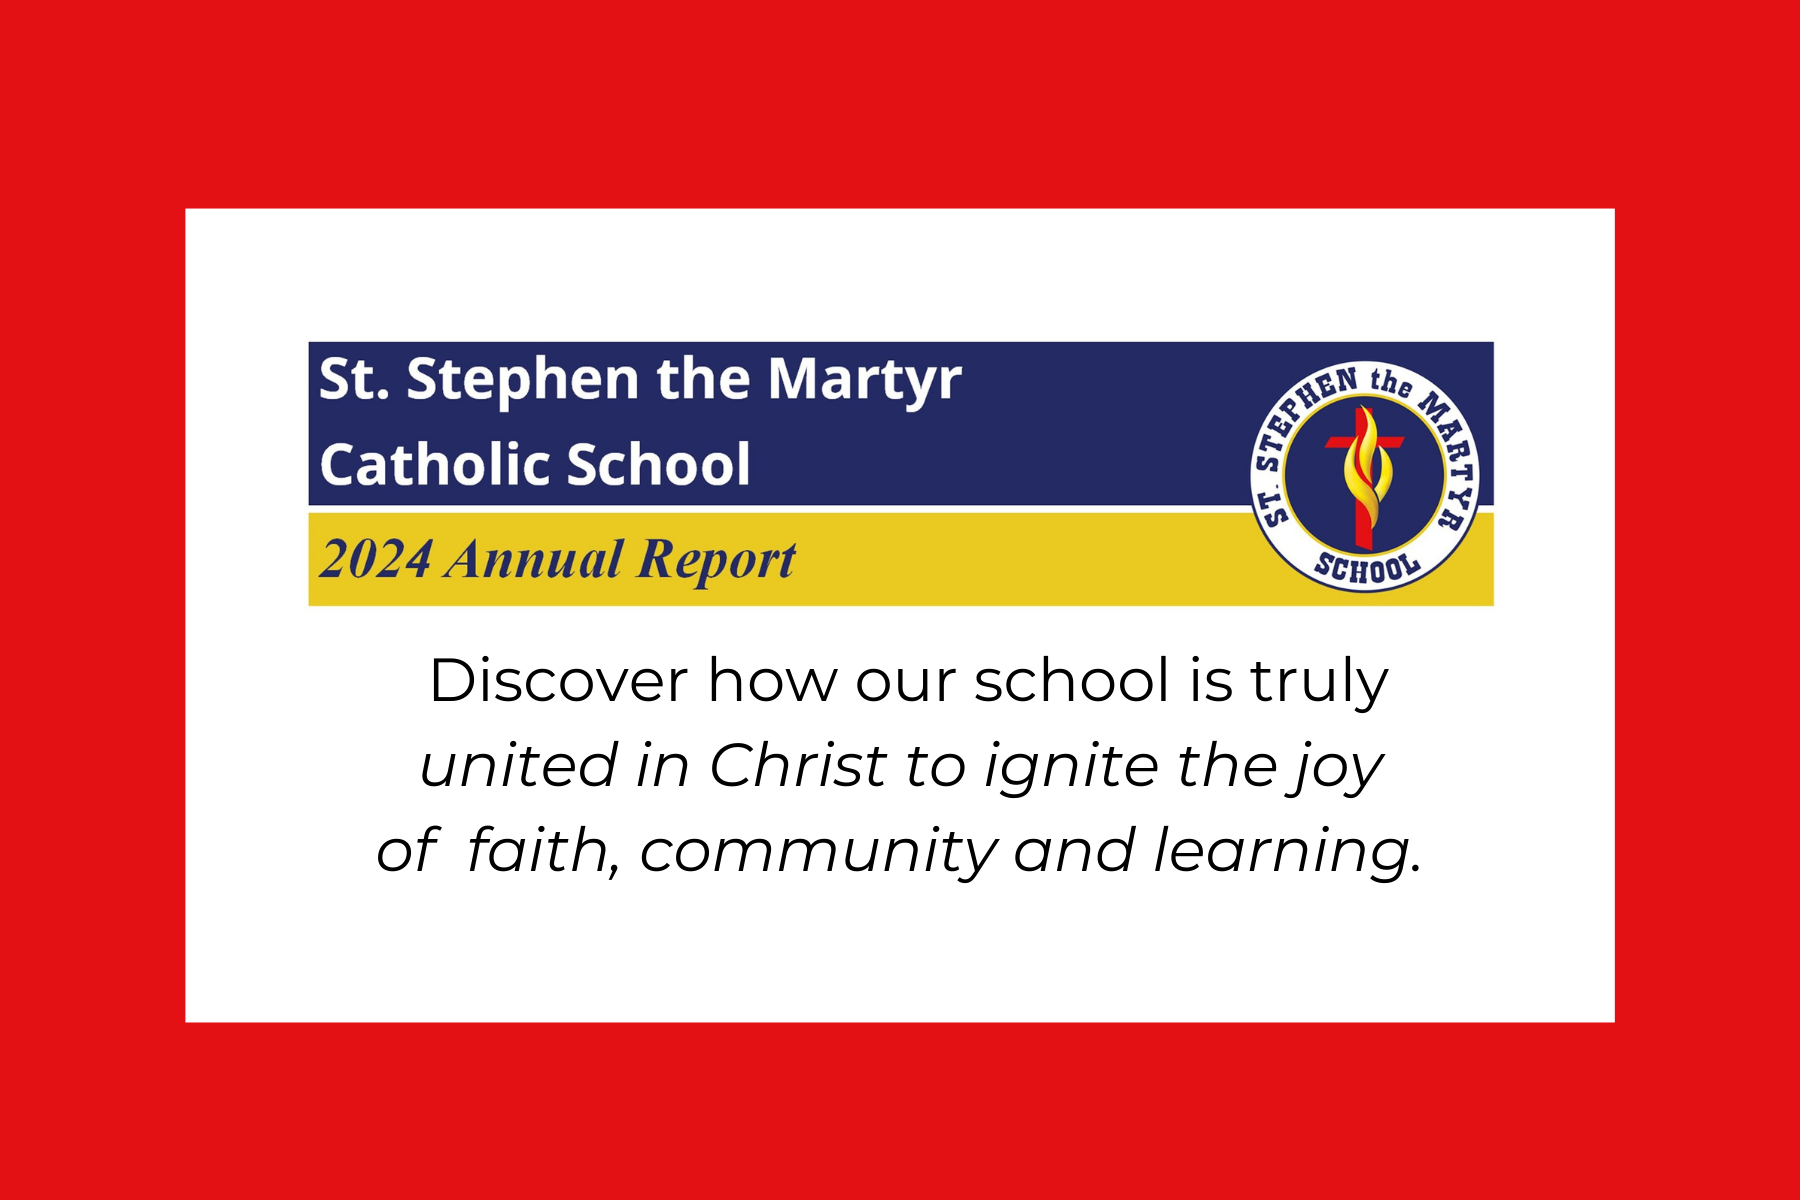 St. Stephen the Martyr School 2024 Annual Report Now Available